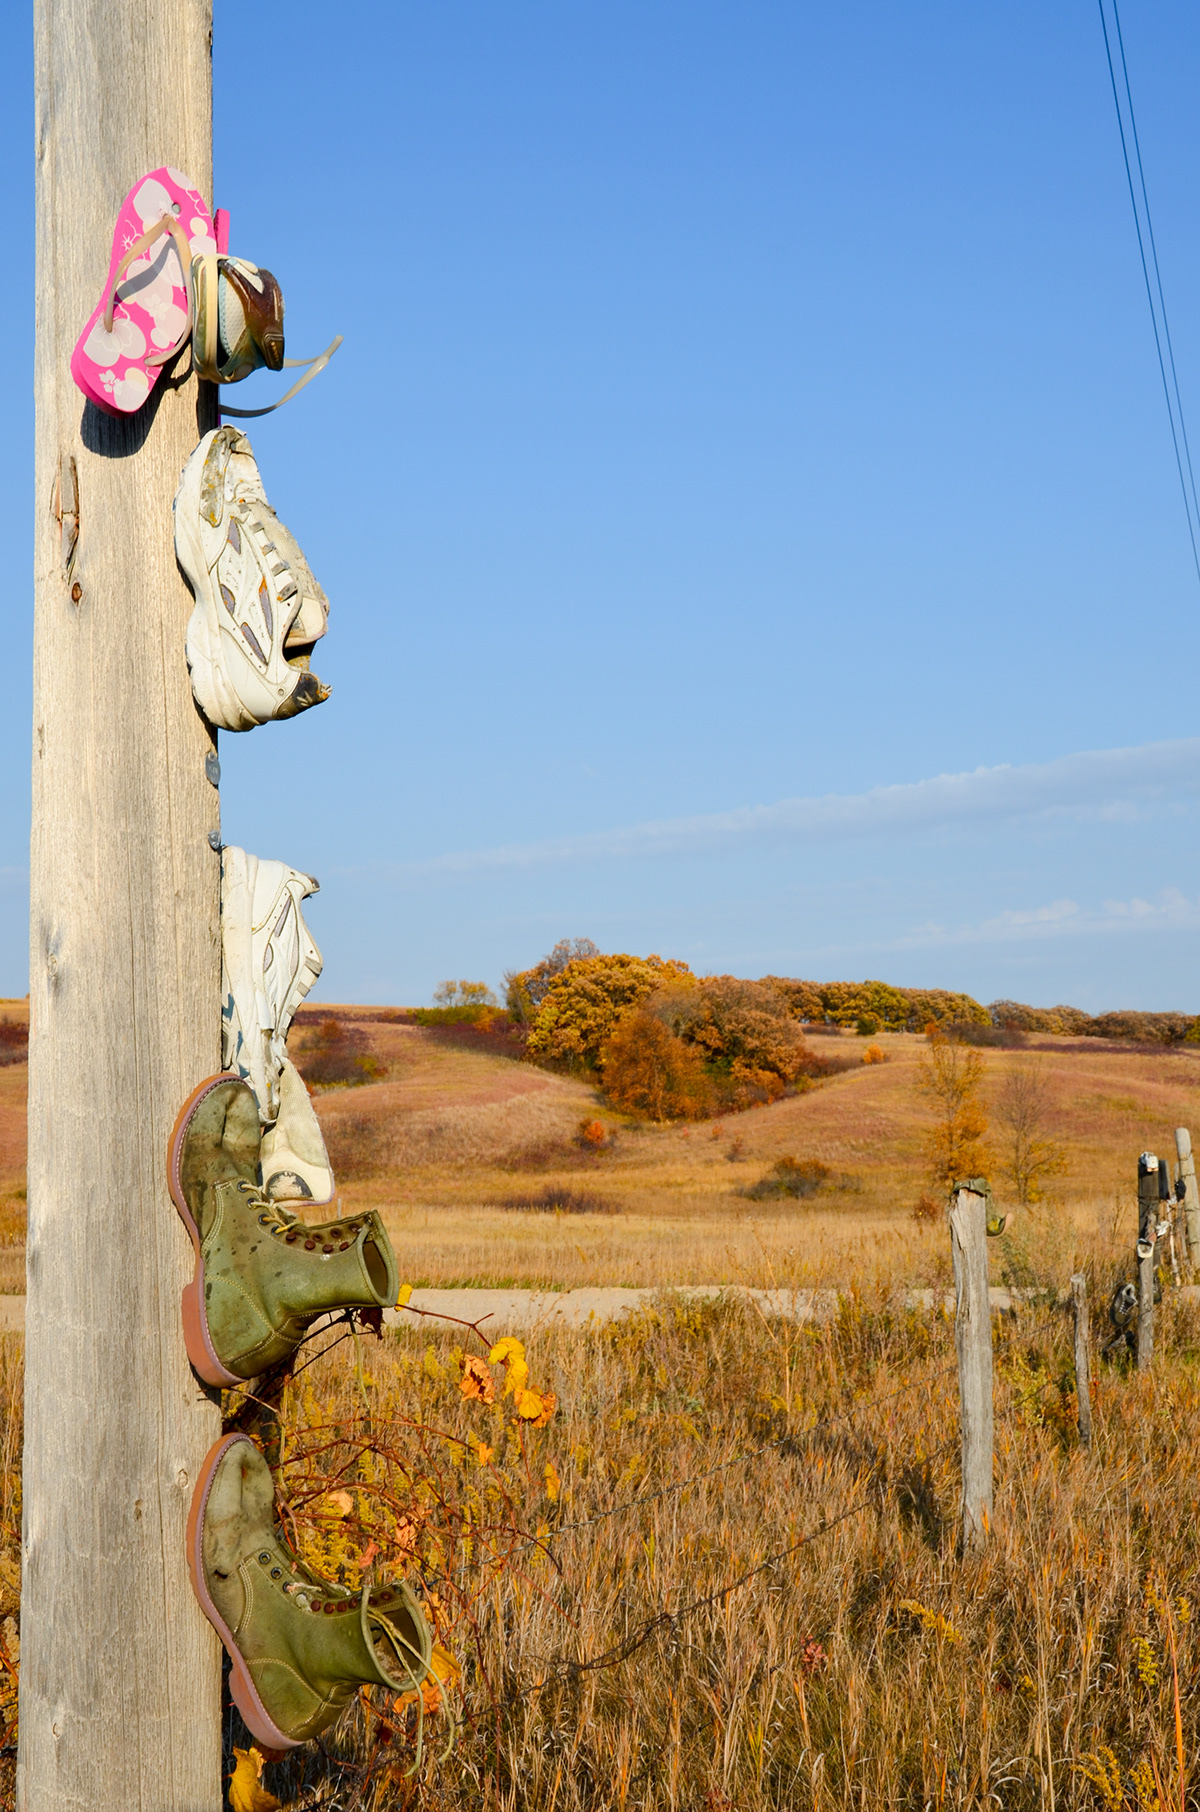 shoes weathered boots heels electrical pole Pole fence rural minnesota Armour Fall Nailed